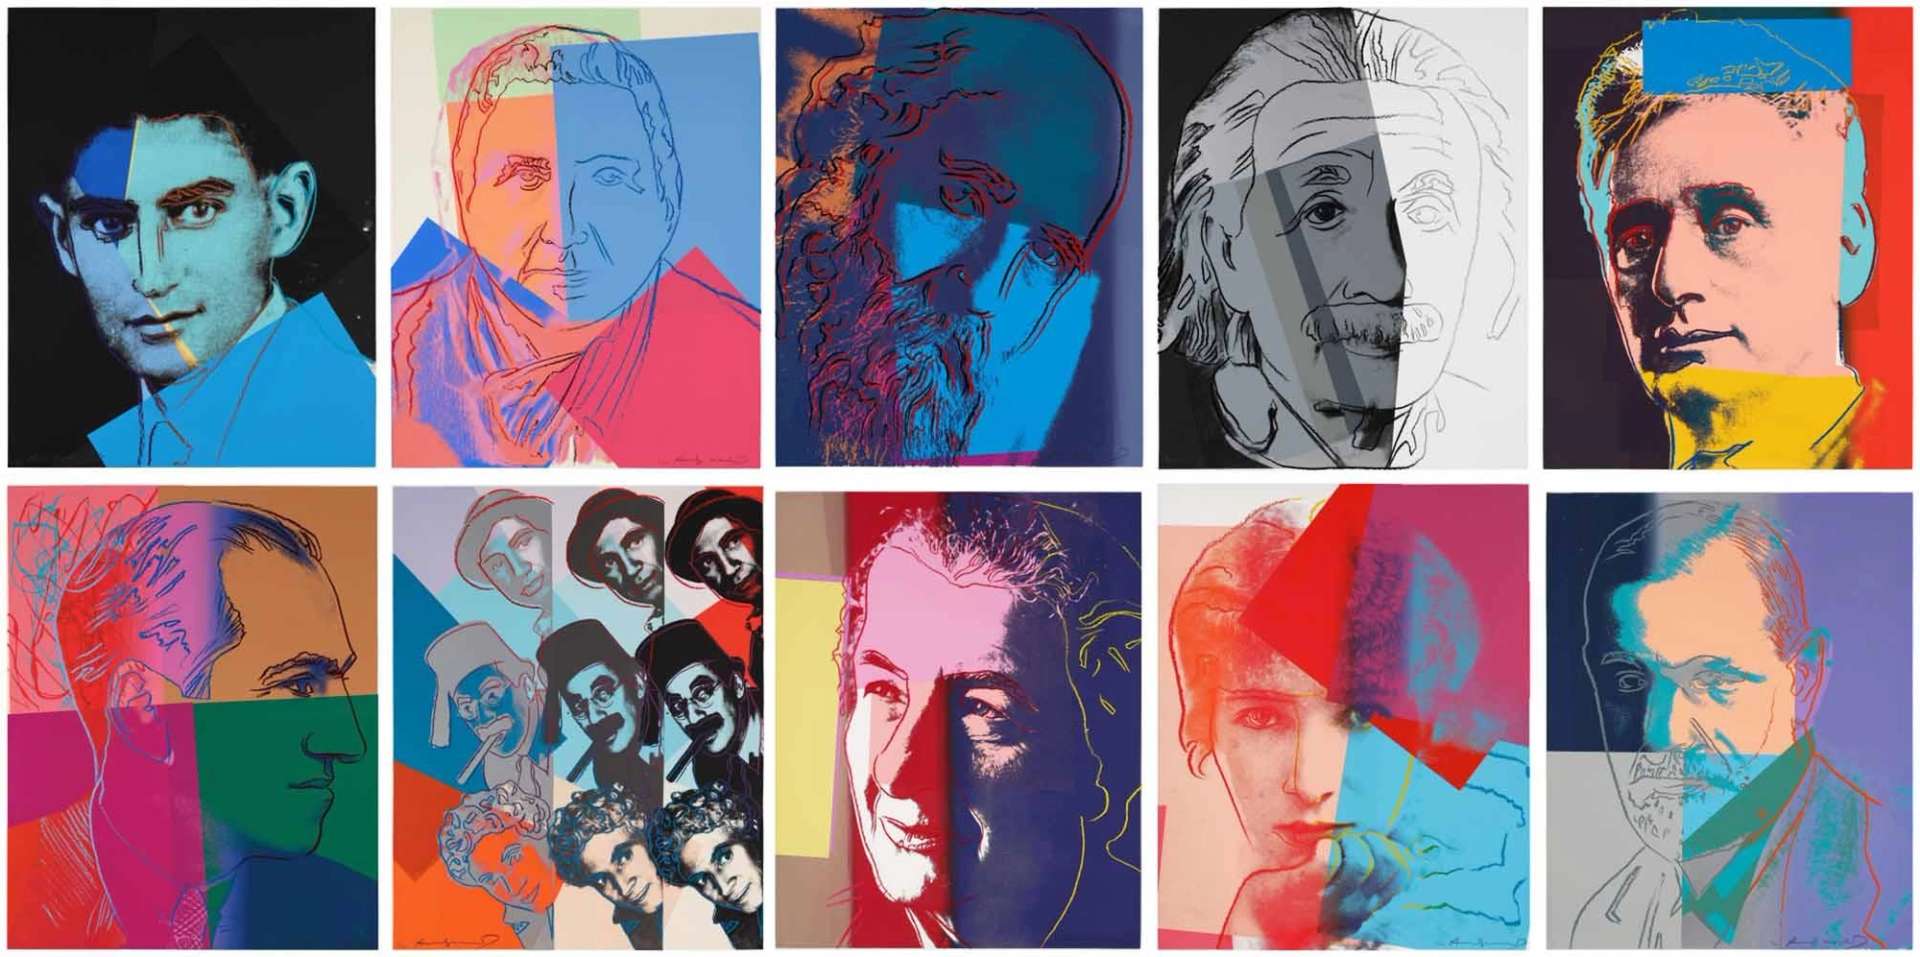 A series of ten screen prints titled "Ten Portraits of Jews of the Twentieth Century" by Andy Warhol, featuring brightly coloured portraits of prominent Jewish figures, including Albert Einstein, Franz Kafka, and Golda Meir, among others.